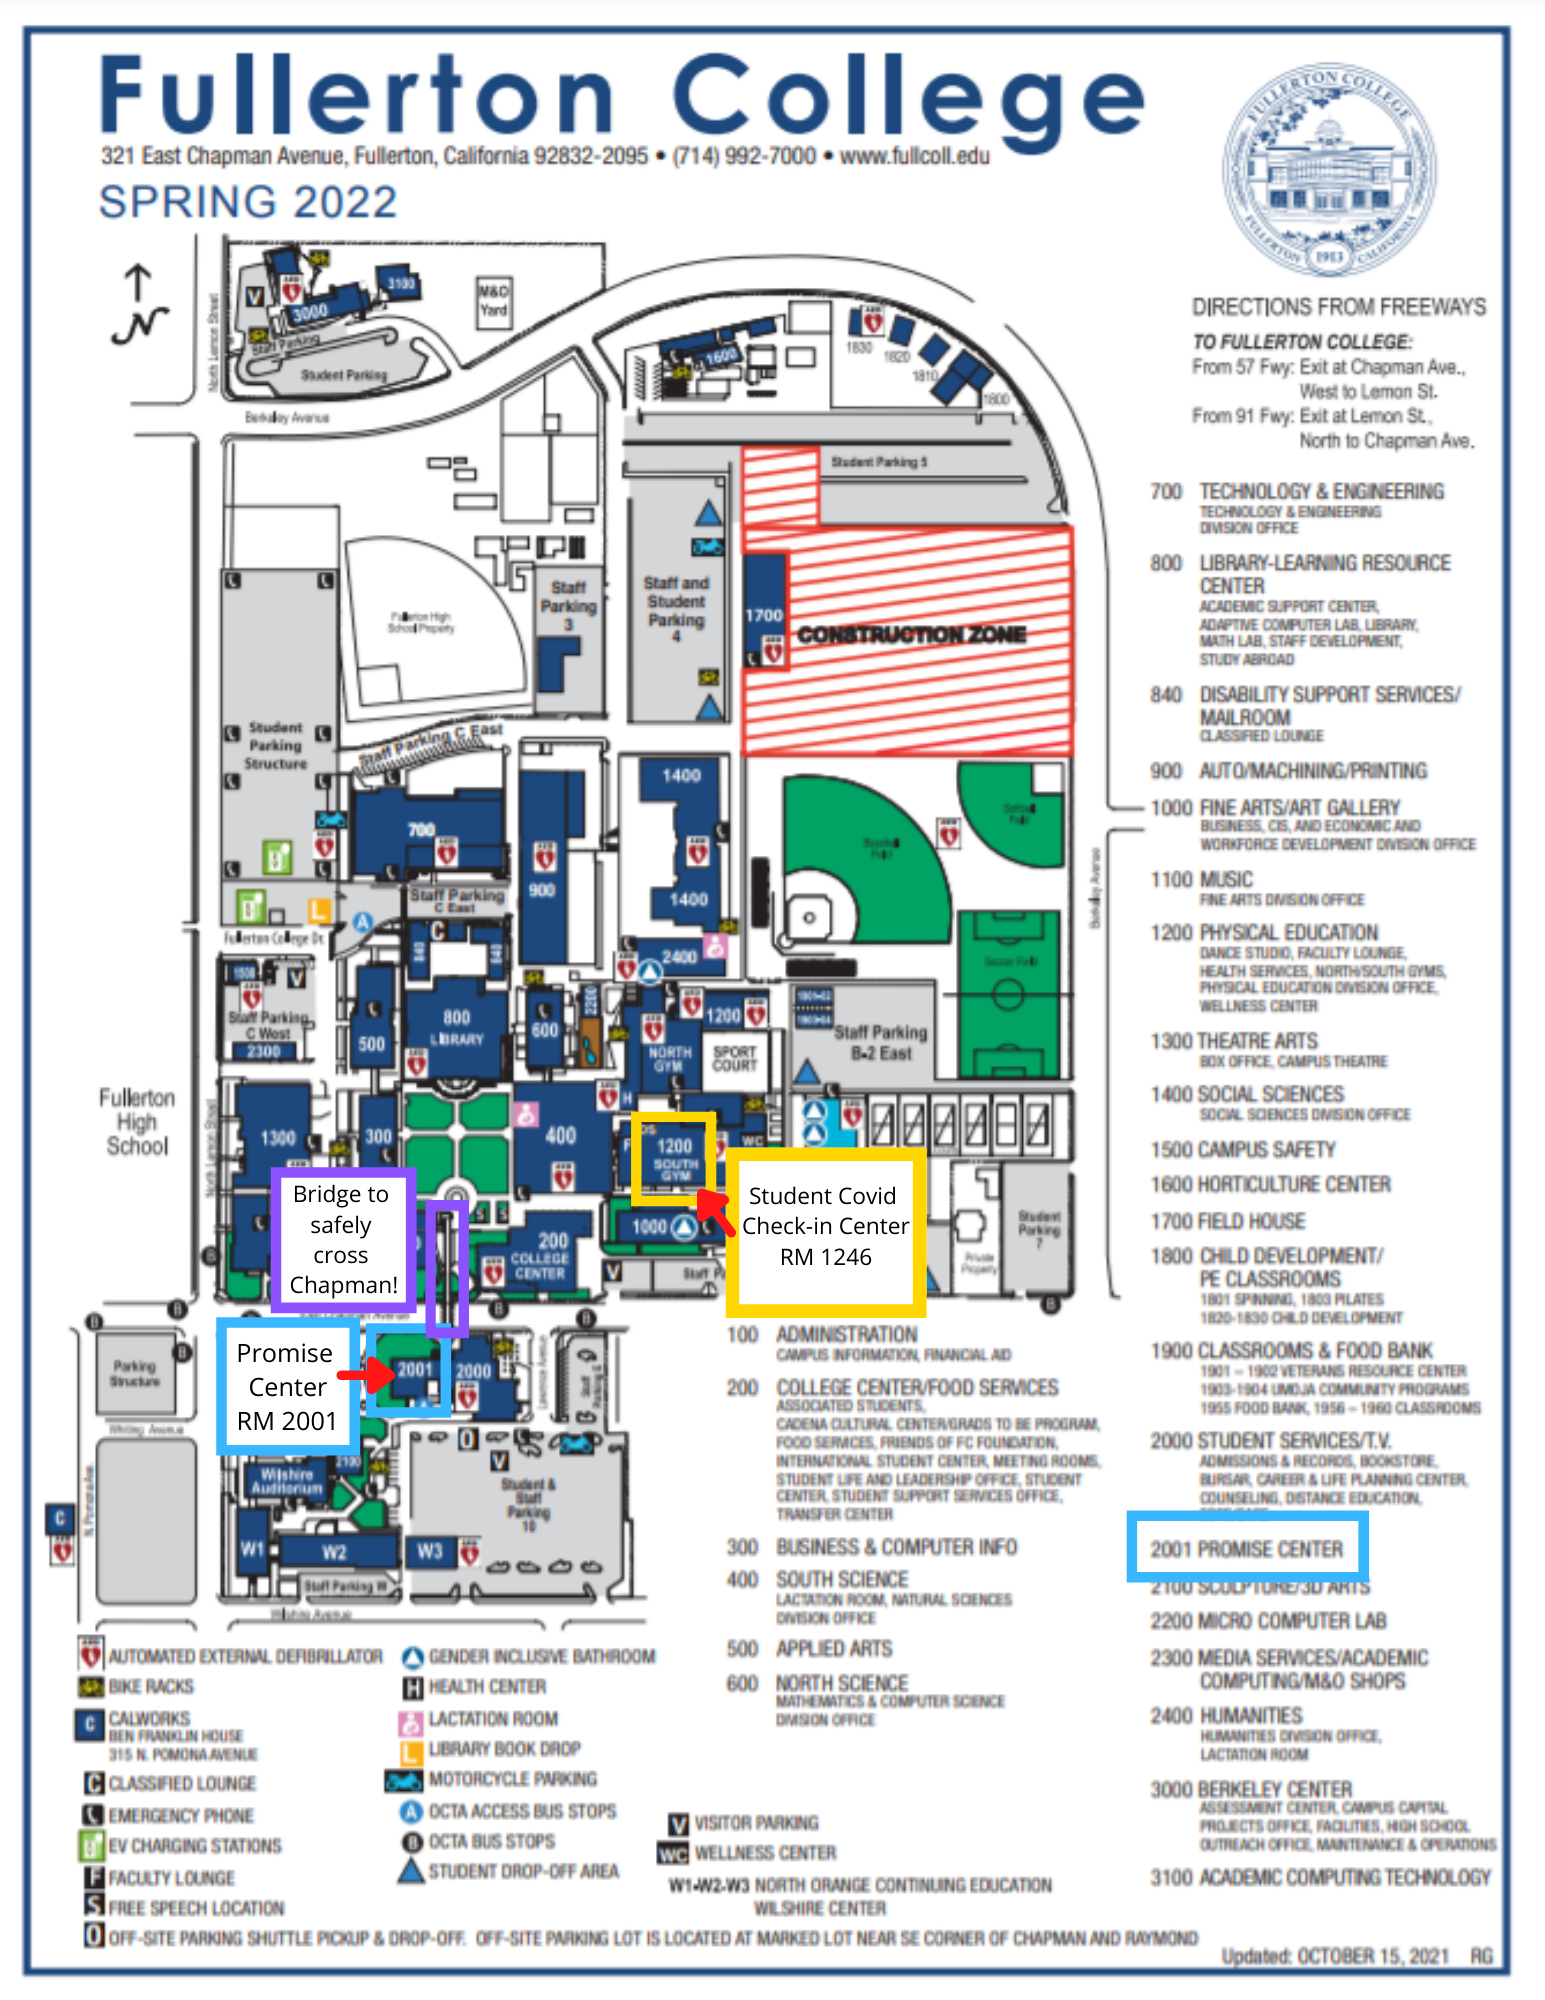 Image of Fullerton College Map